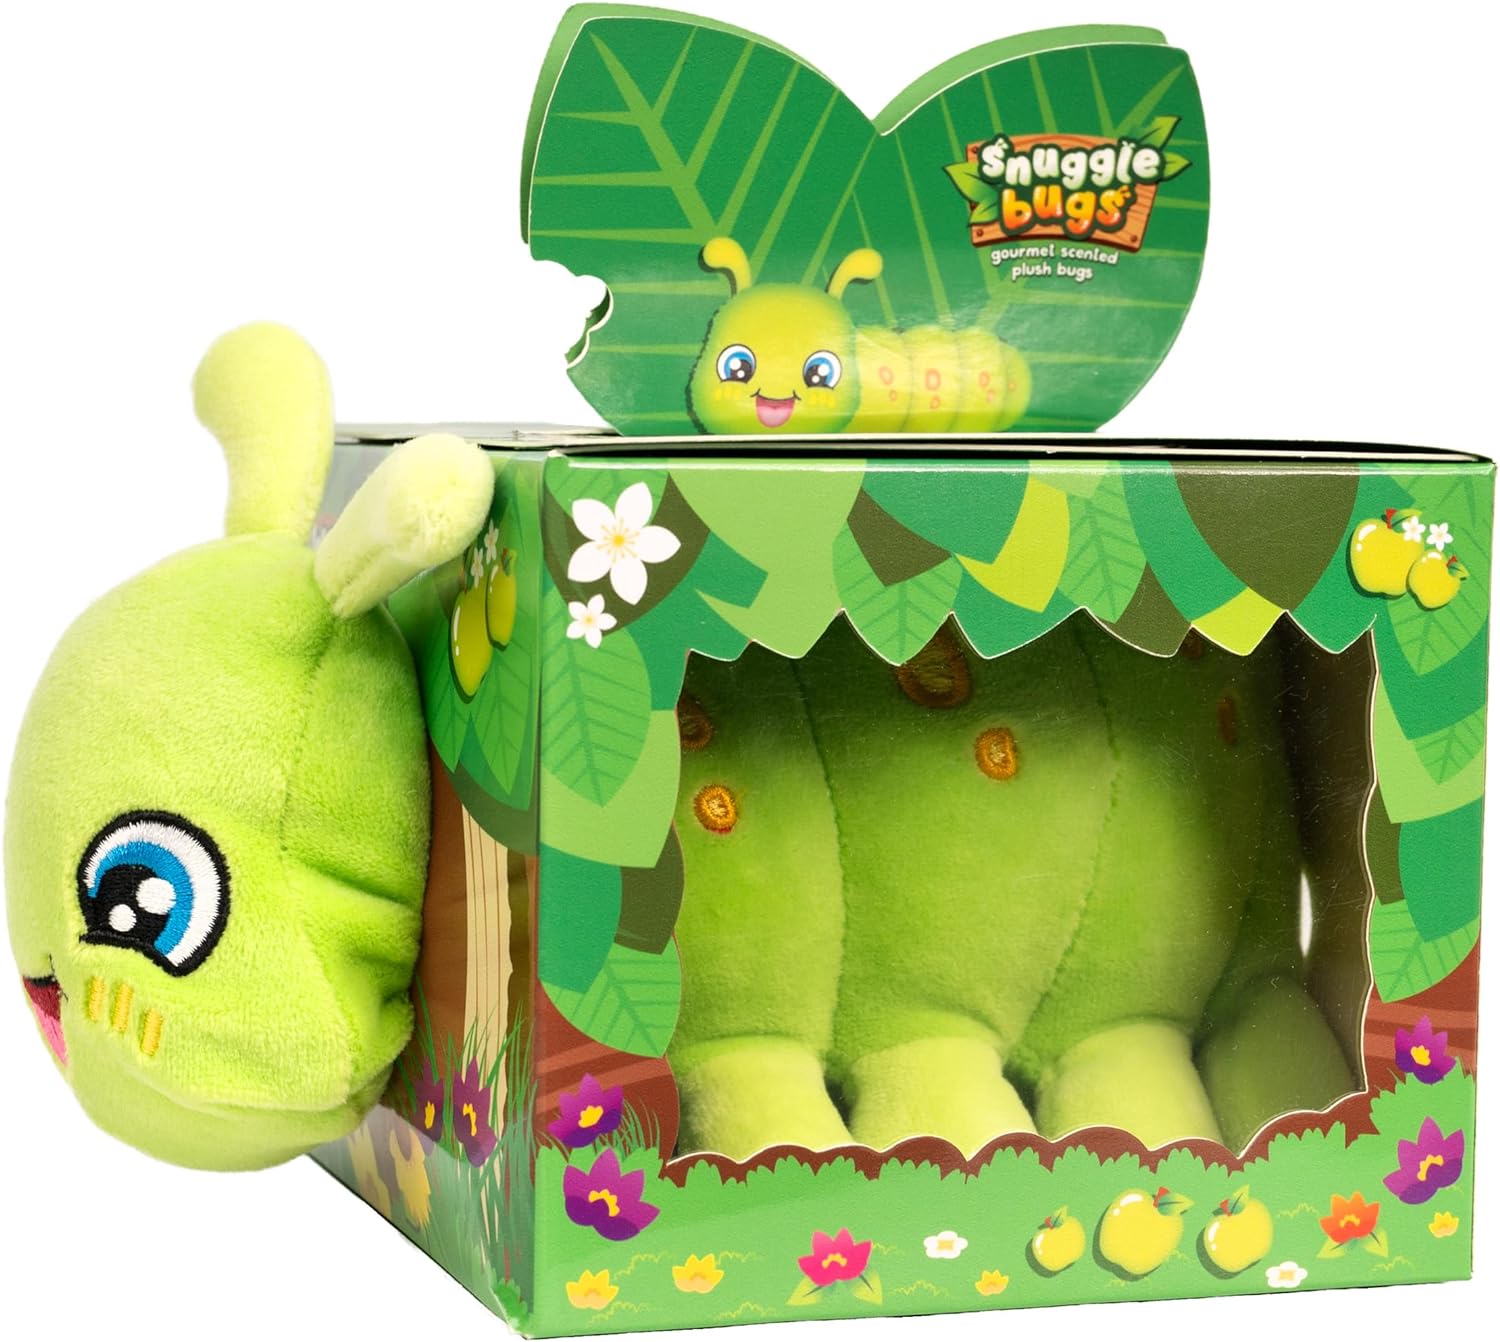 Scentco Snuggle Bugs (Caterpillar)- Green Apple Scented Aromatherapy Plush Toy - Gifts for Kids, Gift Guide